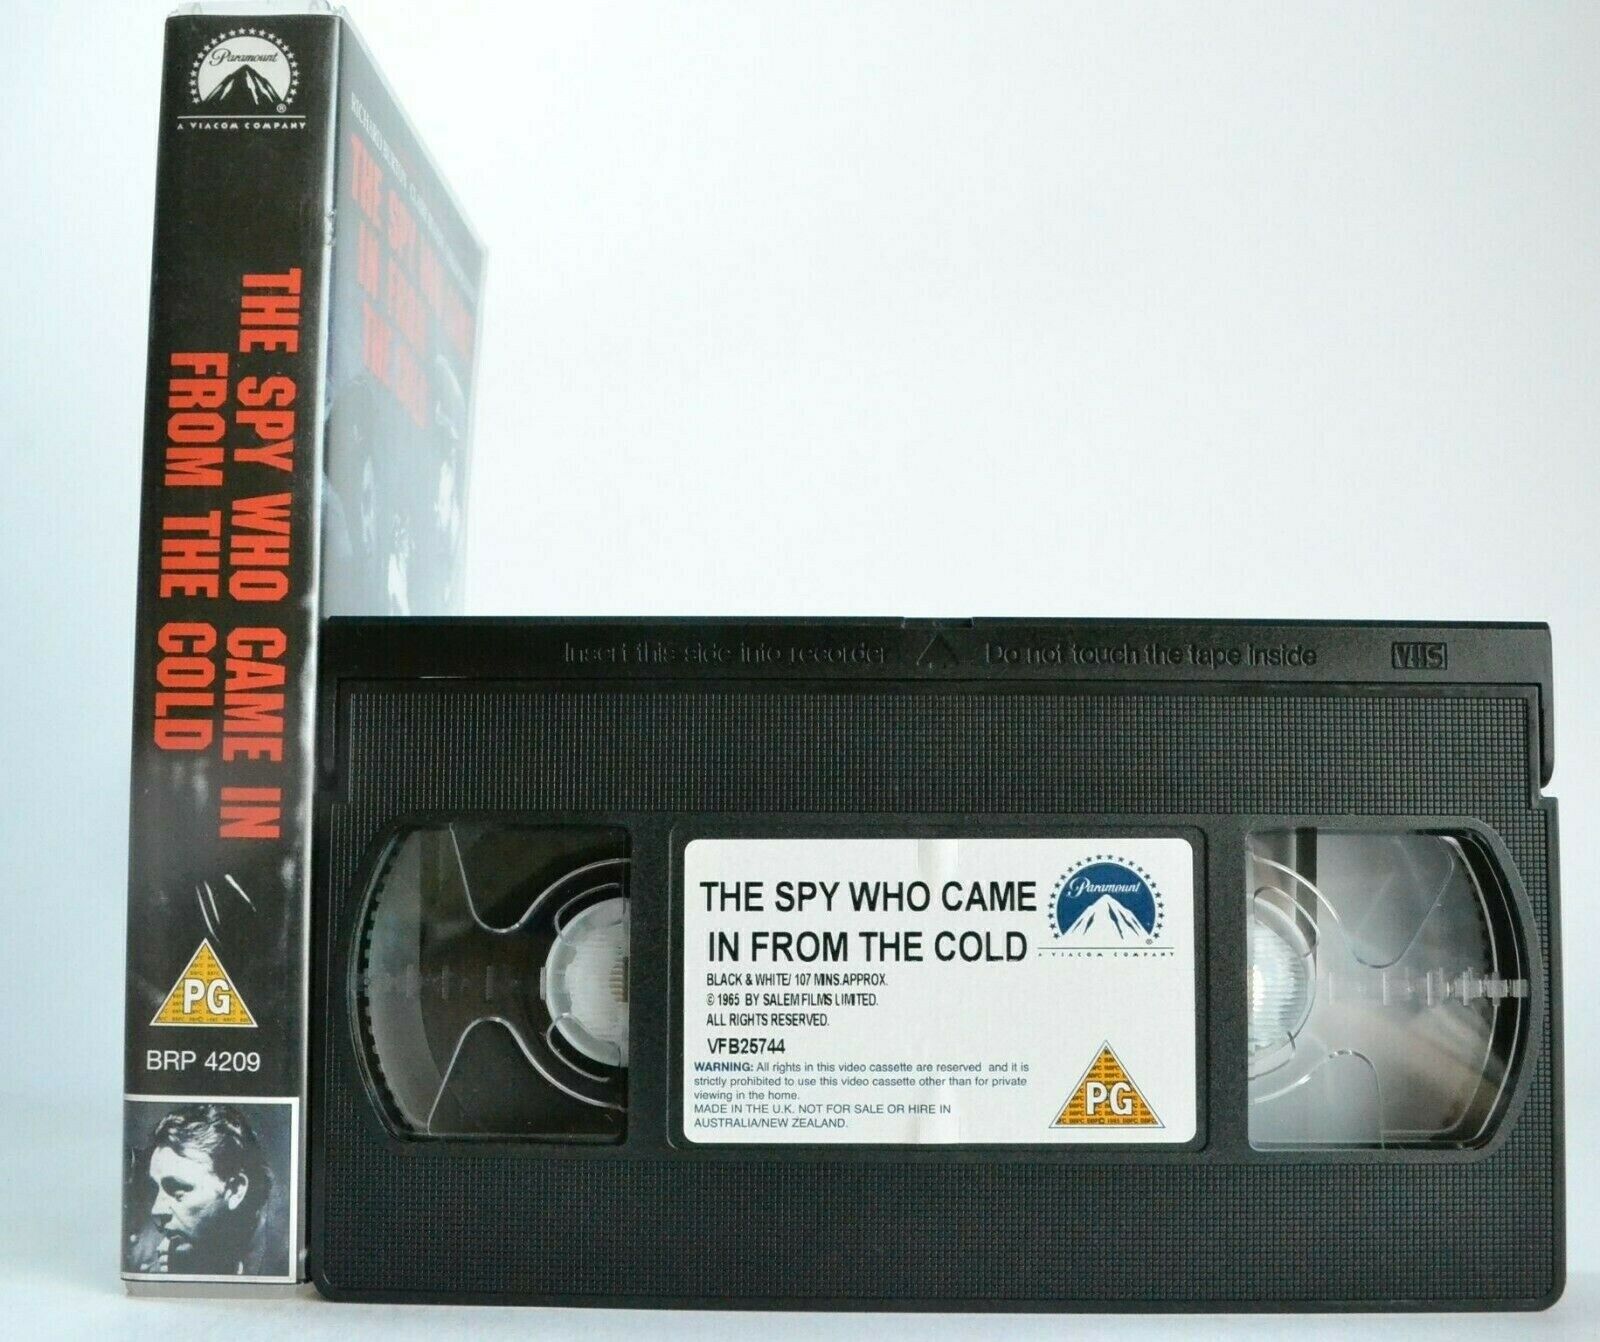 The Spy Who Came In From The Cold (1965) - Thriller - Richard Burton - Pal VHS-